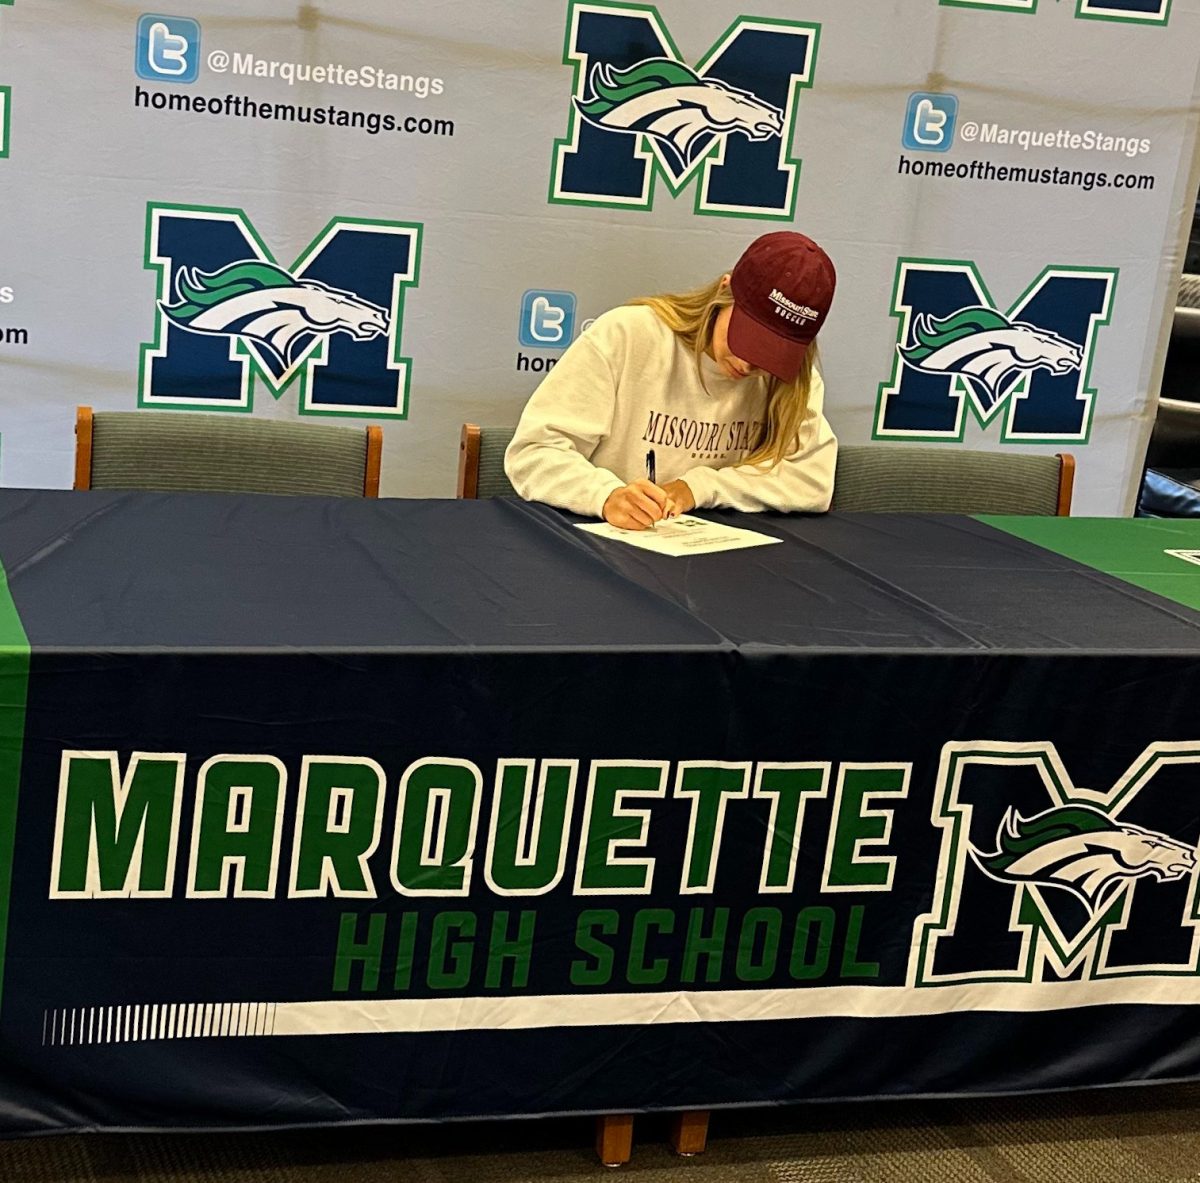 Bri Kappeler, senior, signs a contract, which officially seals her commitment to the soccer program at Missouri State.